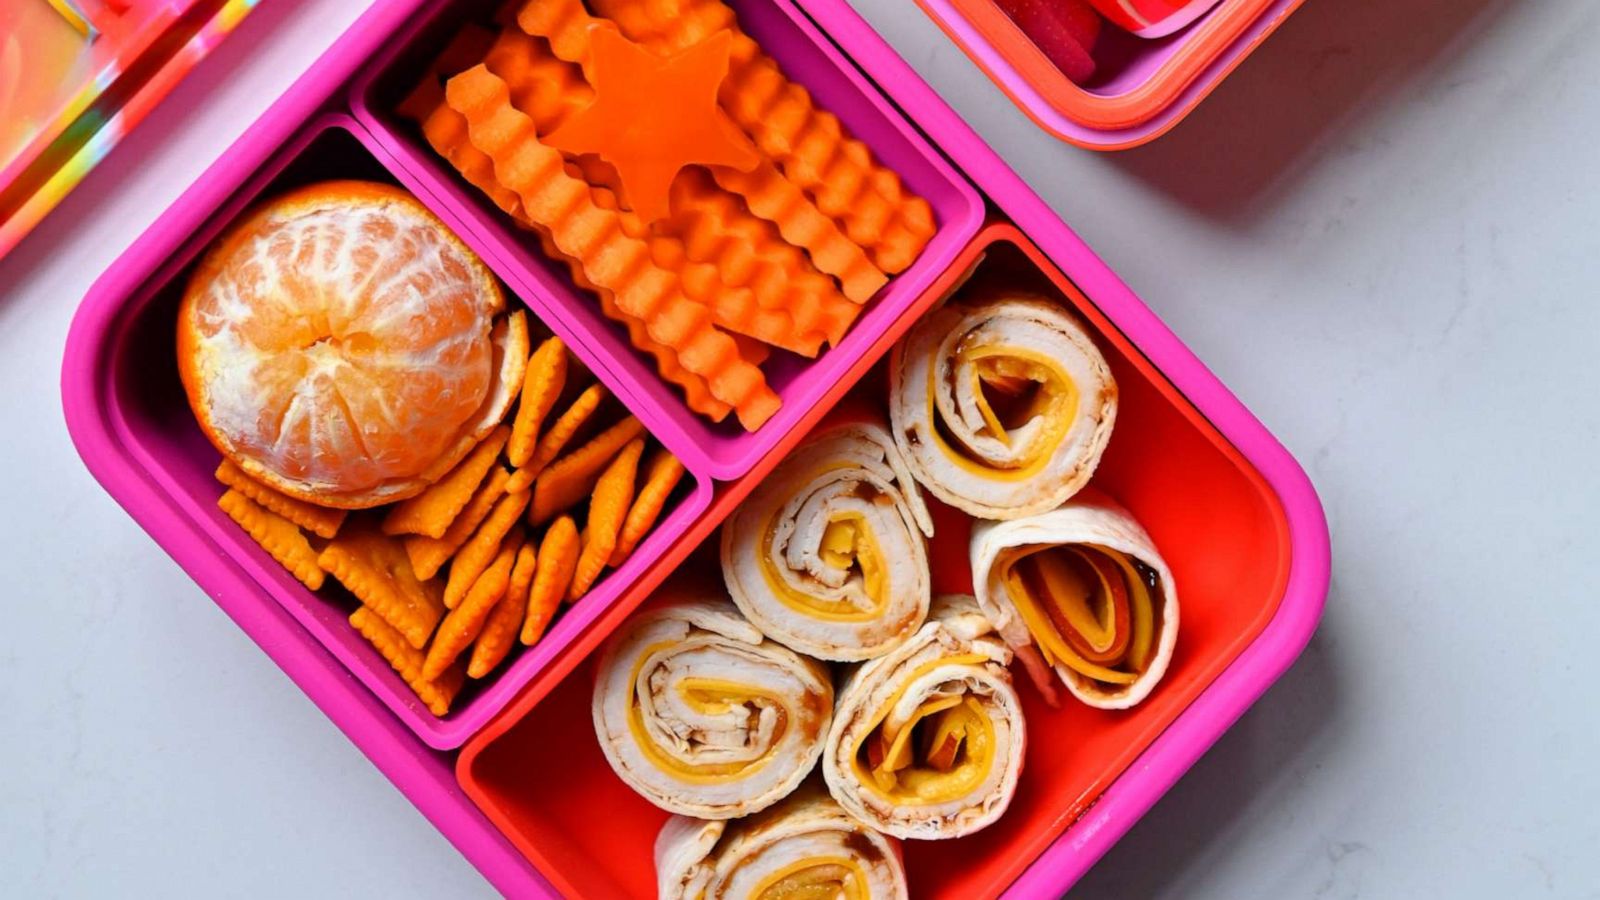 https://s.abcnews.com/images/GMA/red-and-orange-lunchboxes_1691408948203_hpMain_16x9_1600.jpg